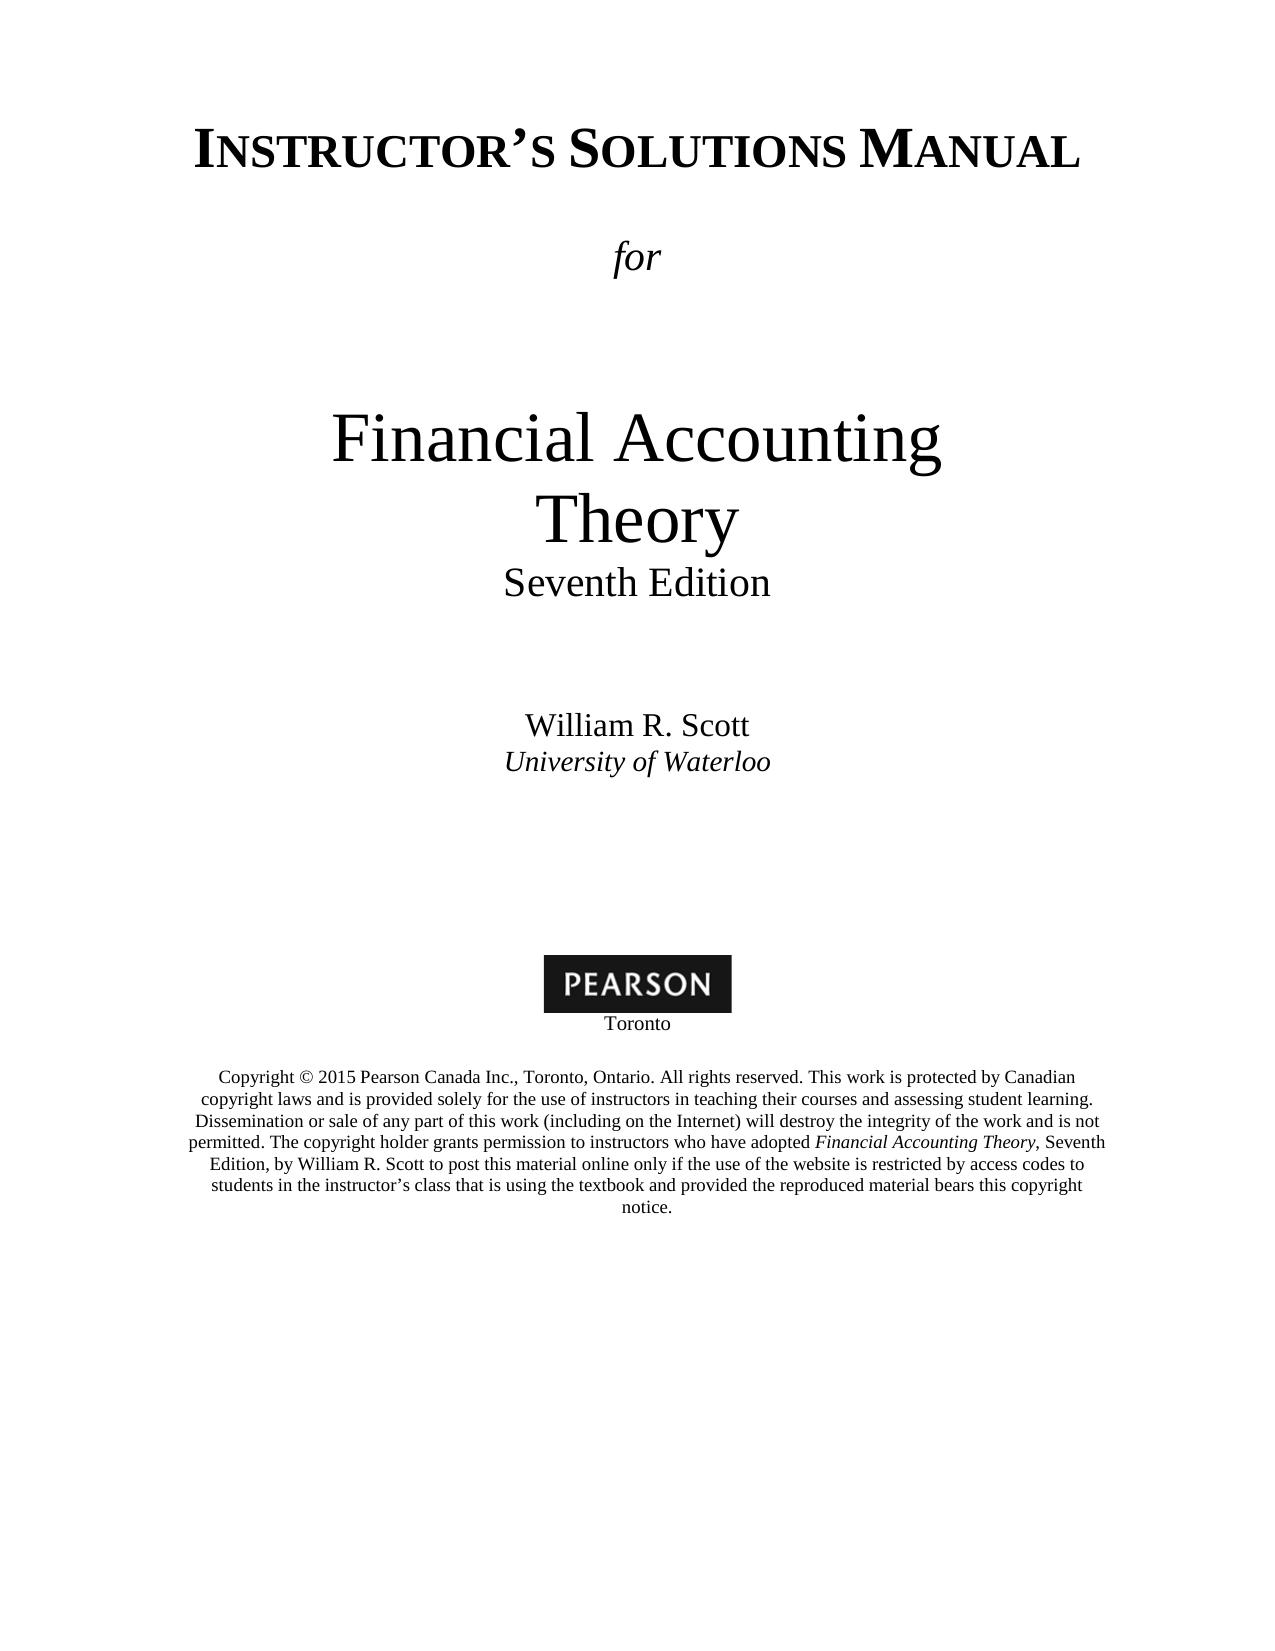 Solution manual for Financial Accounting Theory (7th Edition) 2015